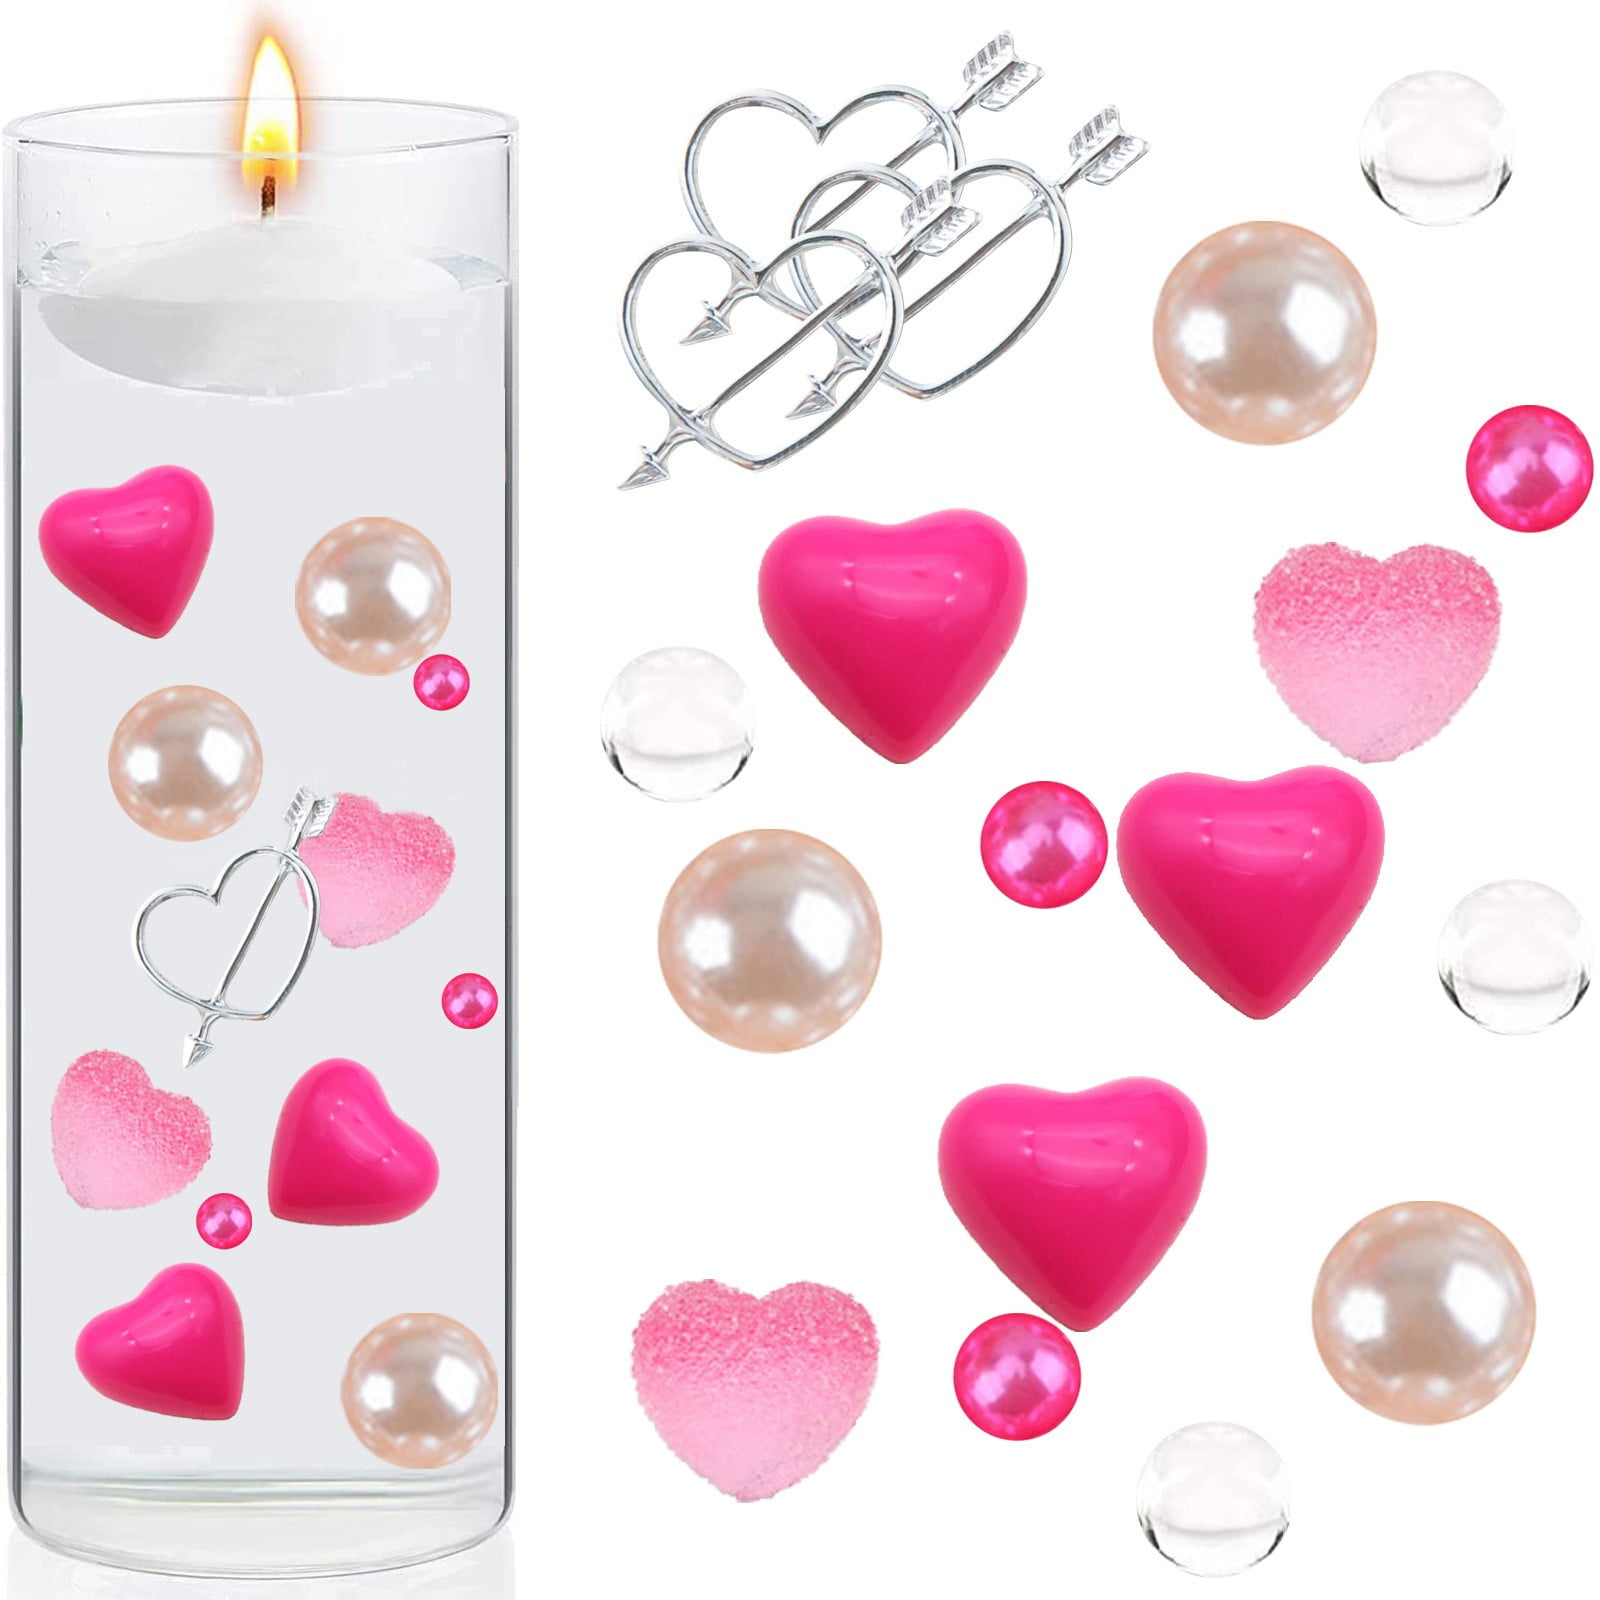 Creative Heart Shaped Candle Jelly Wax Pink Romantic Candle Gel Scented Wax  Candles Birthday Kaarsjes Wedding Candles 50ko342 - Candles - AliExpress